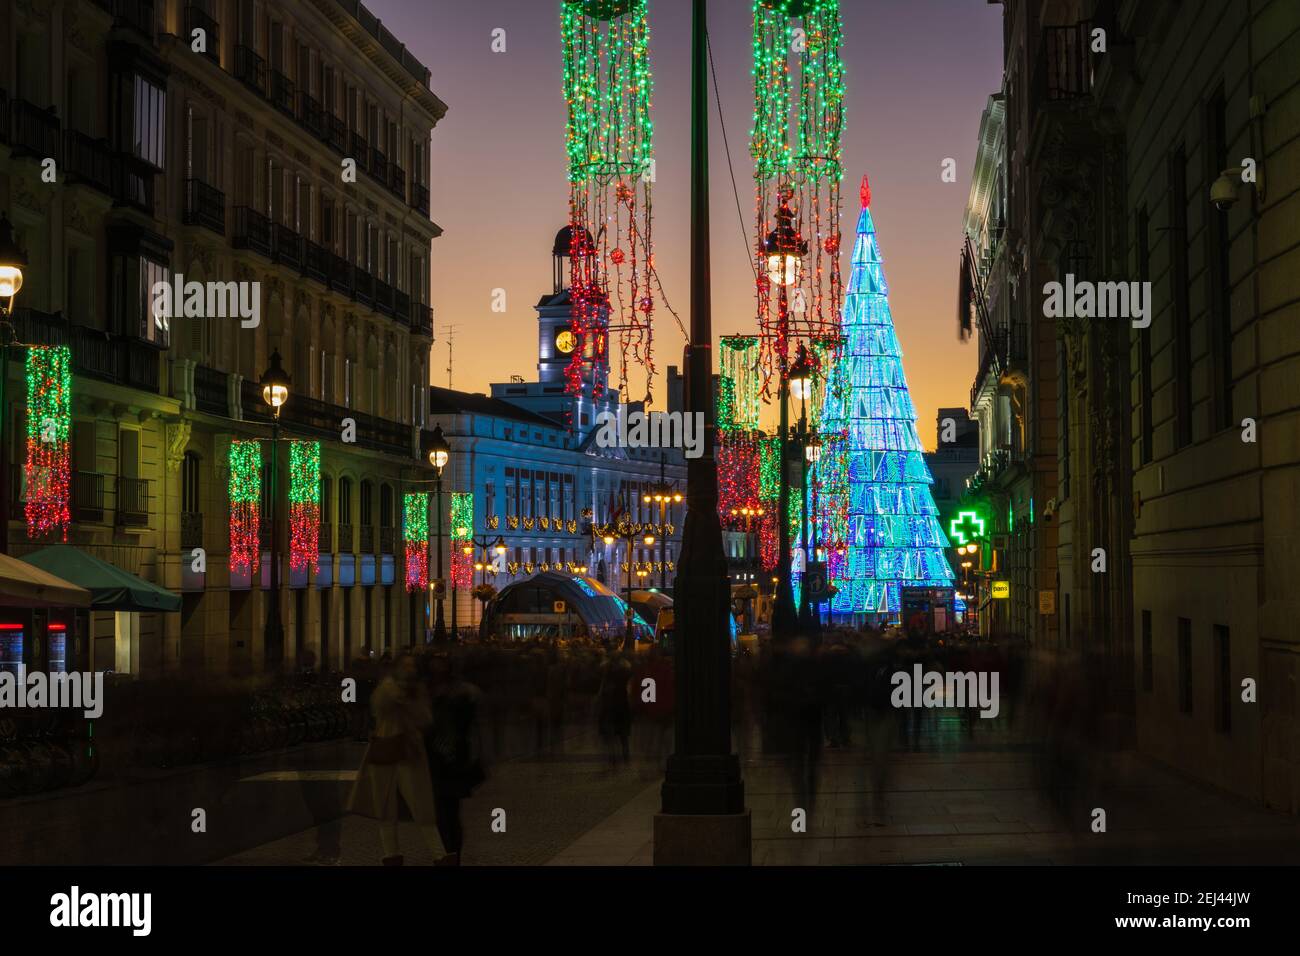 MADRID - DECEMBER 26, 2020: Crowds of people gather at the Puerta del Sol square in Madrid, Spain, with the traditional illuminated Christmas tree ris Stock Photo